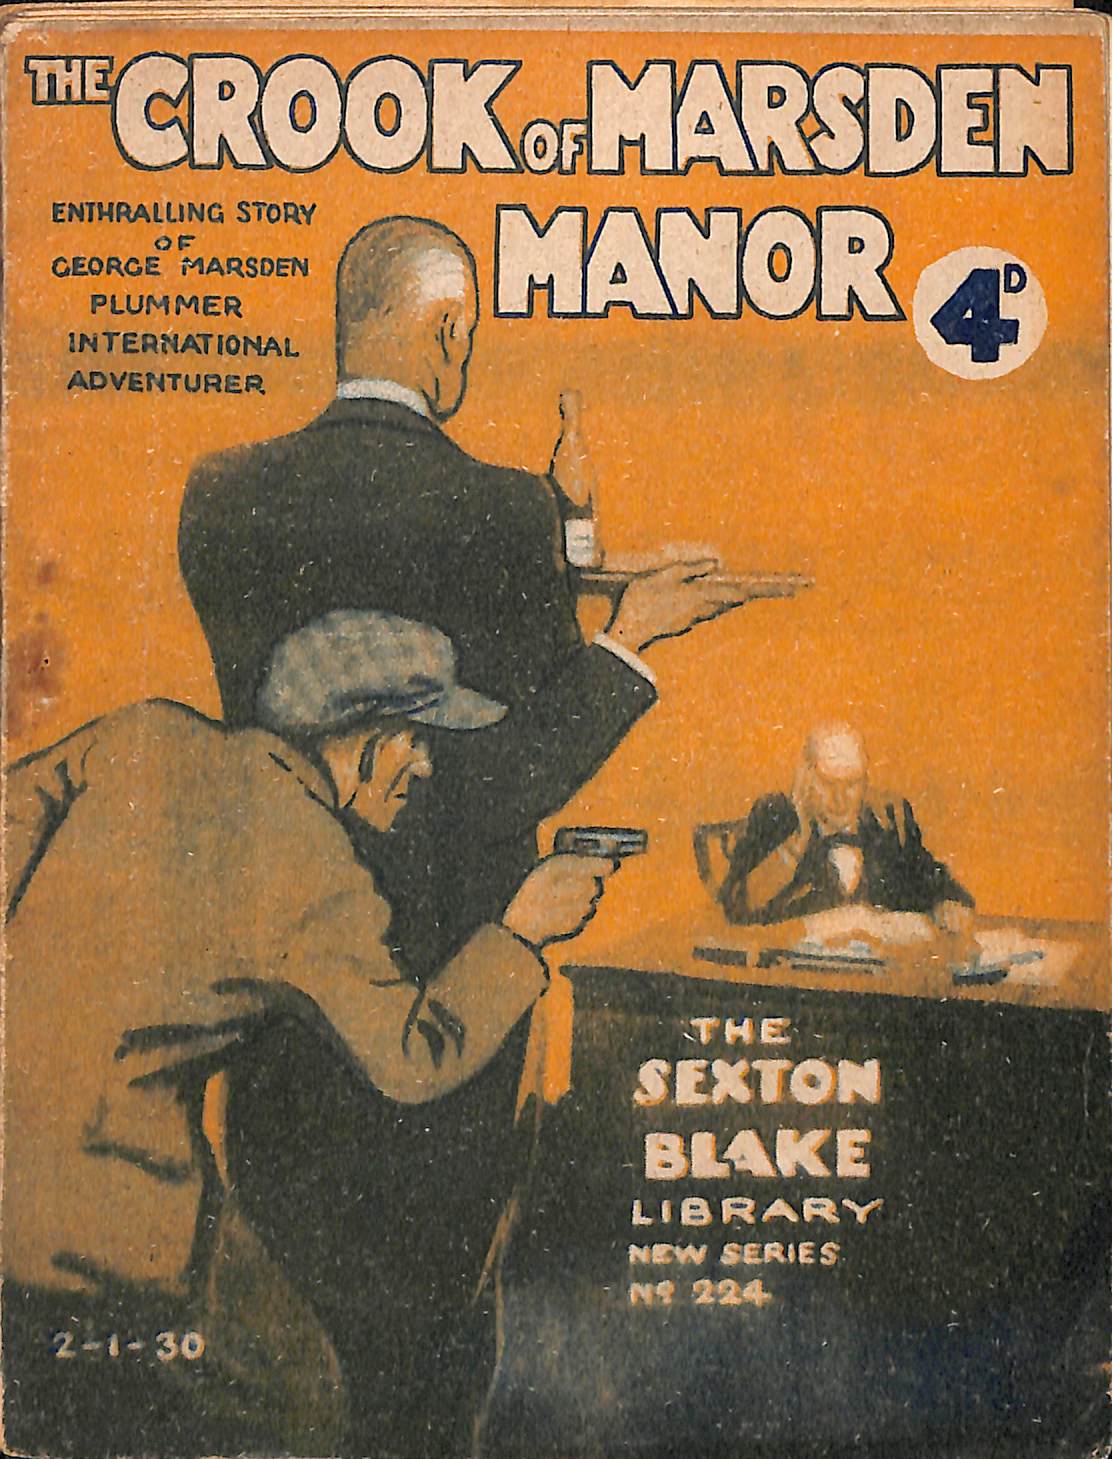 Book Cover For Sexton Blake Library S2 224 - The Crook of Marsden Manor